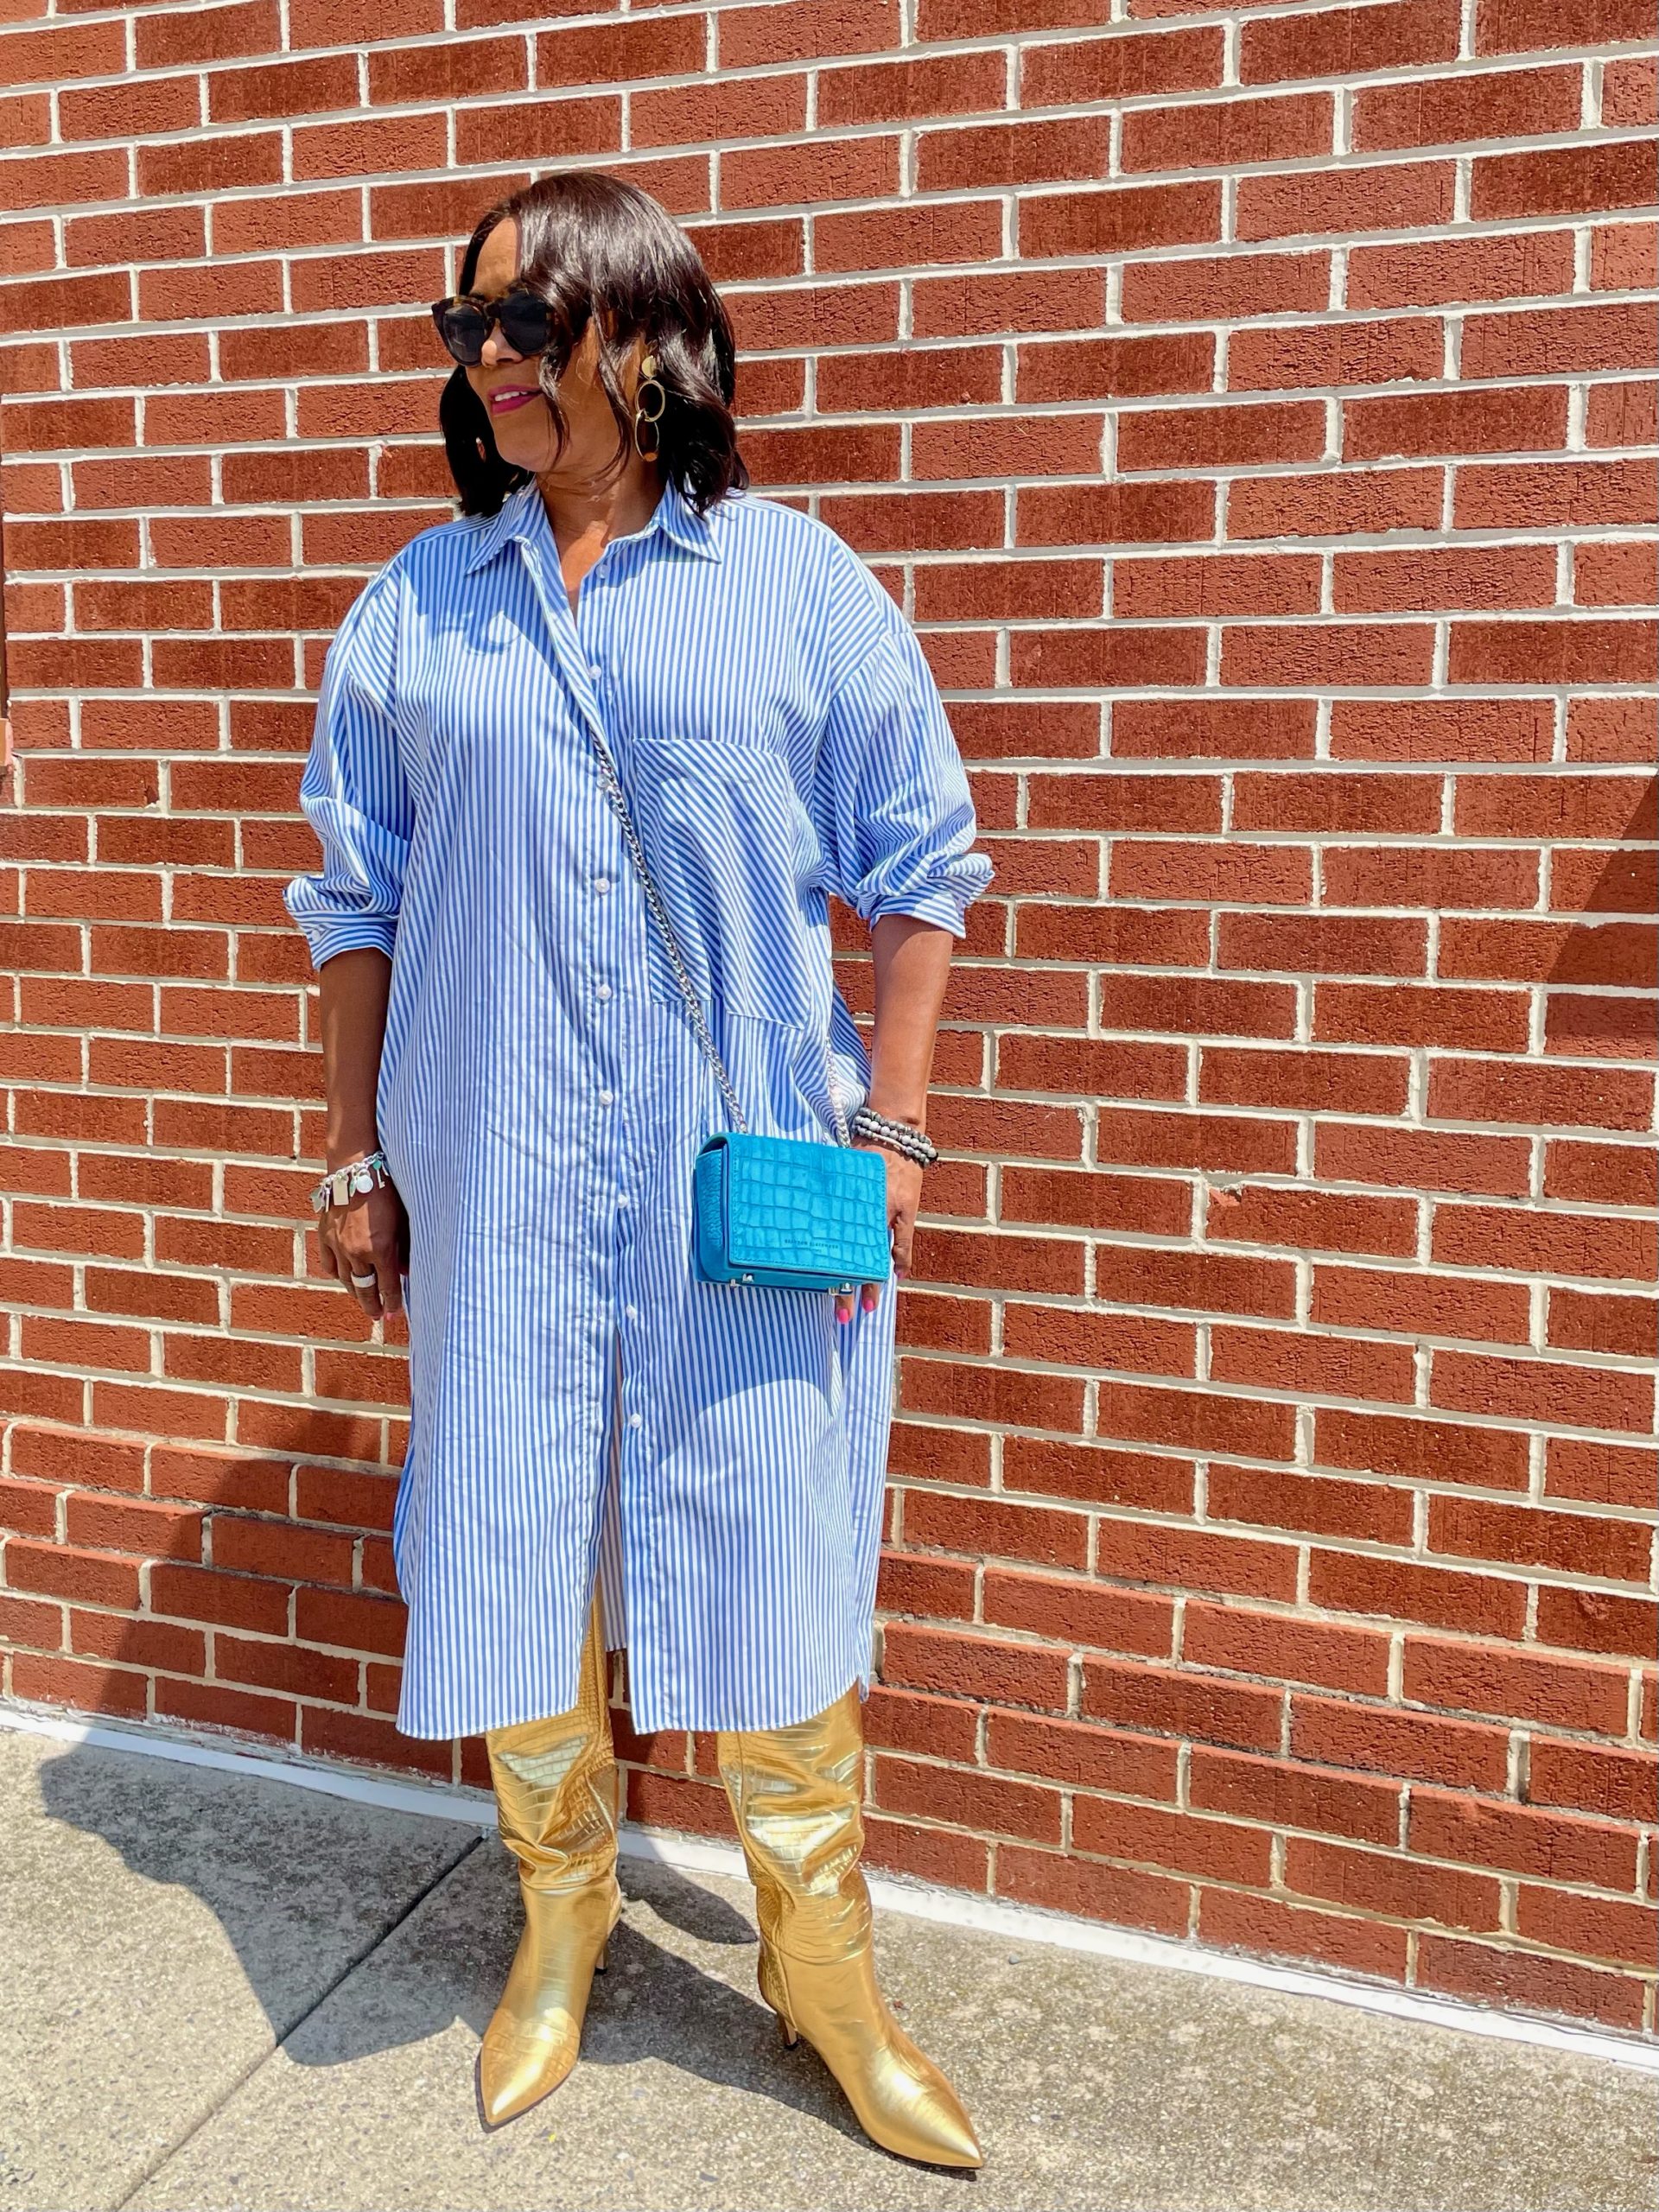 Easing Into Fall with oversized summer shirtdress and tall boots